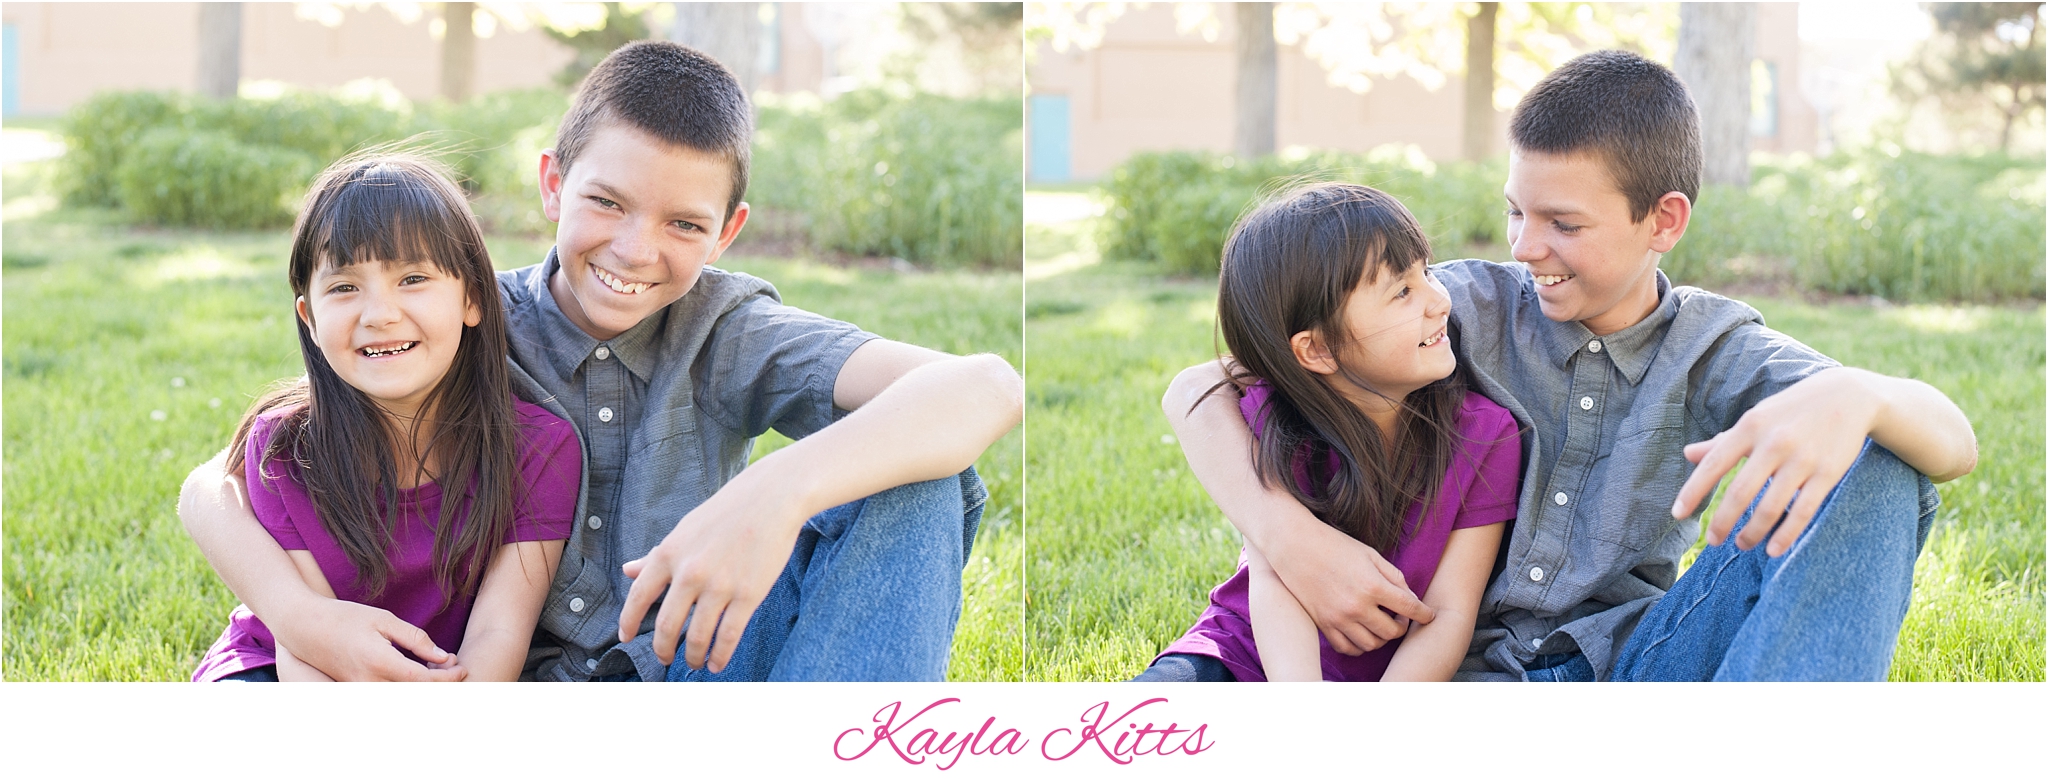 kayla kitts photography - albuquerque wedding photographer - albuquerque engagement photographer - nm wedding - albuquerque wedding - nm wedding - unm engagement - bosque engagement session_0004.jpg